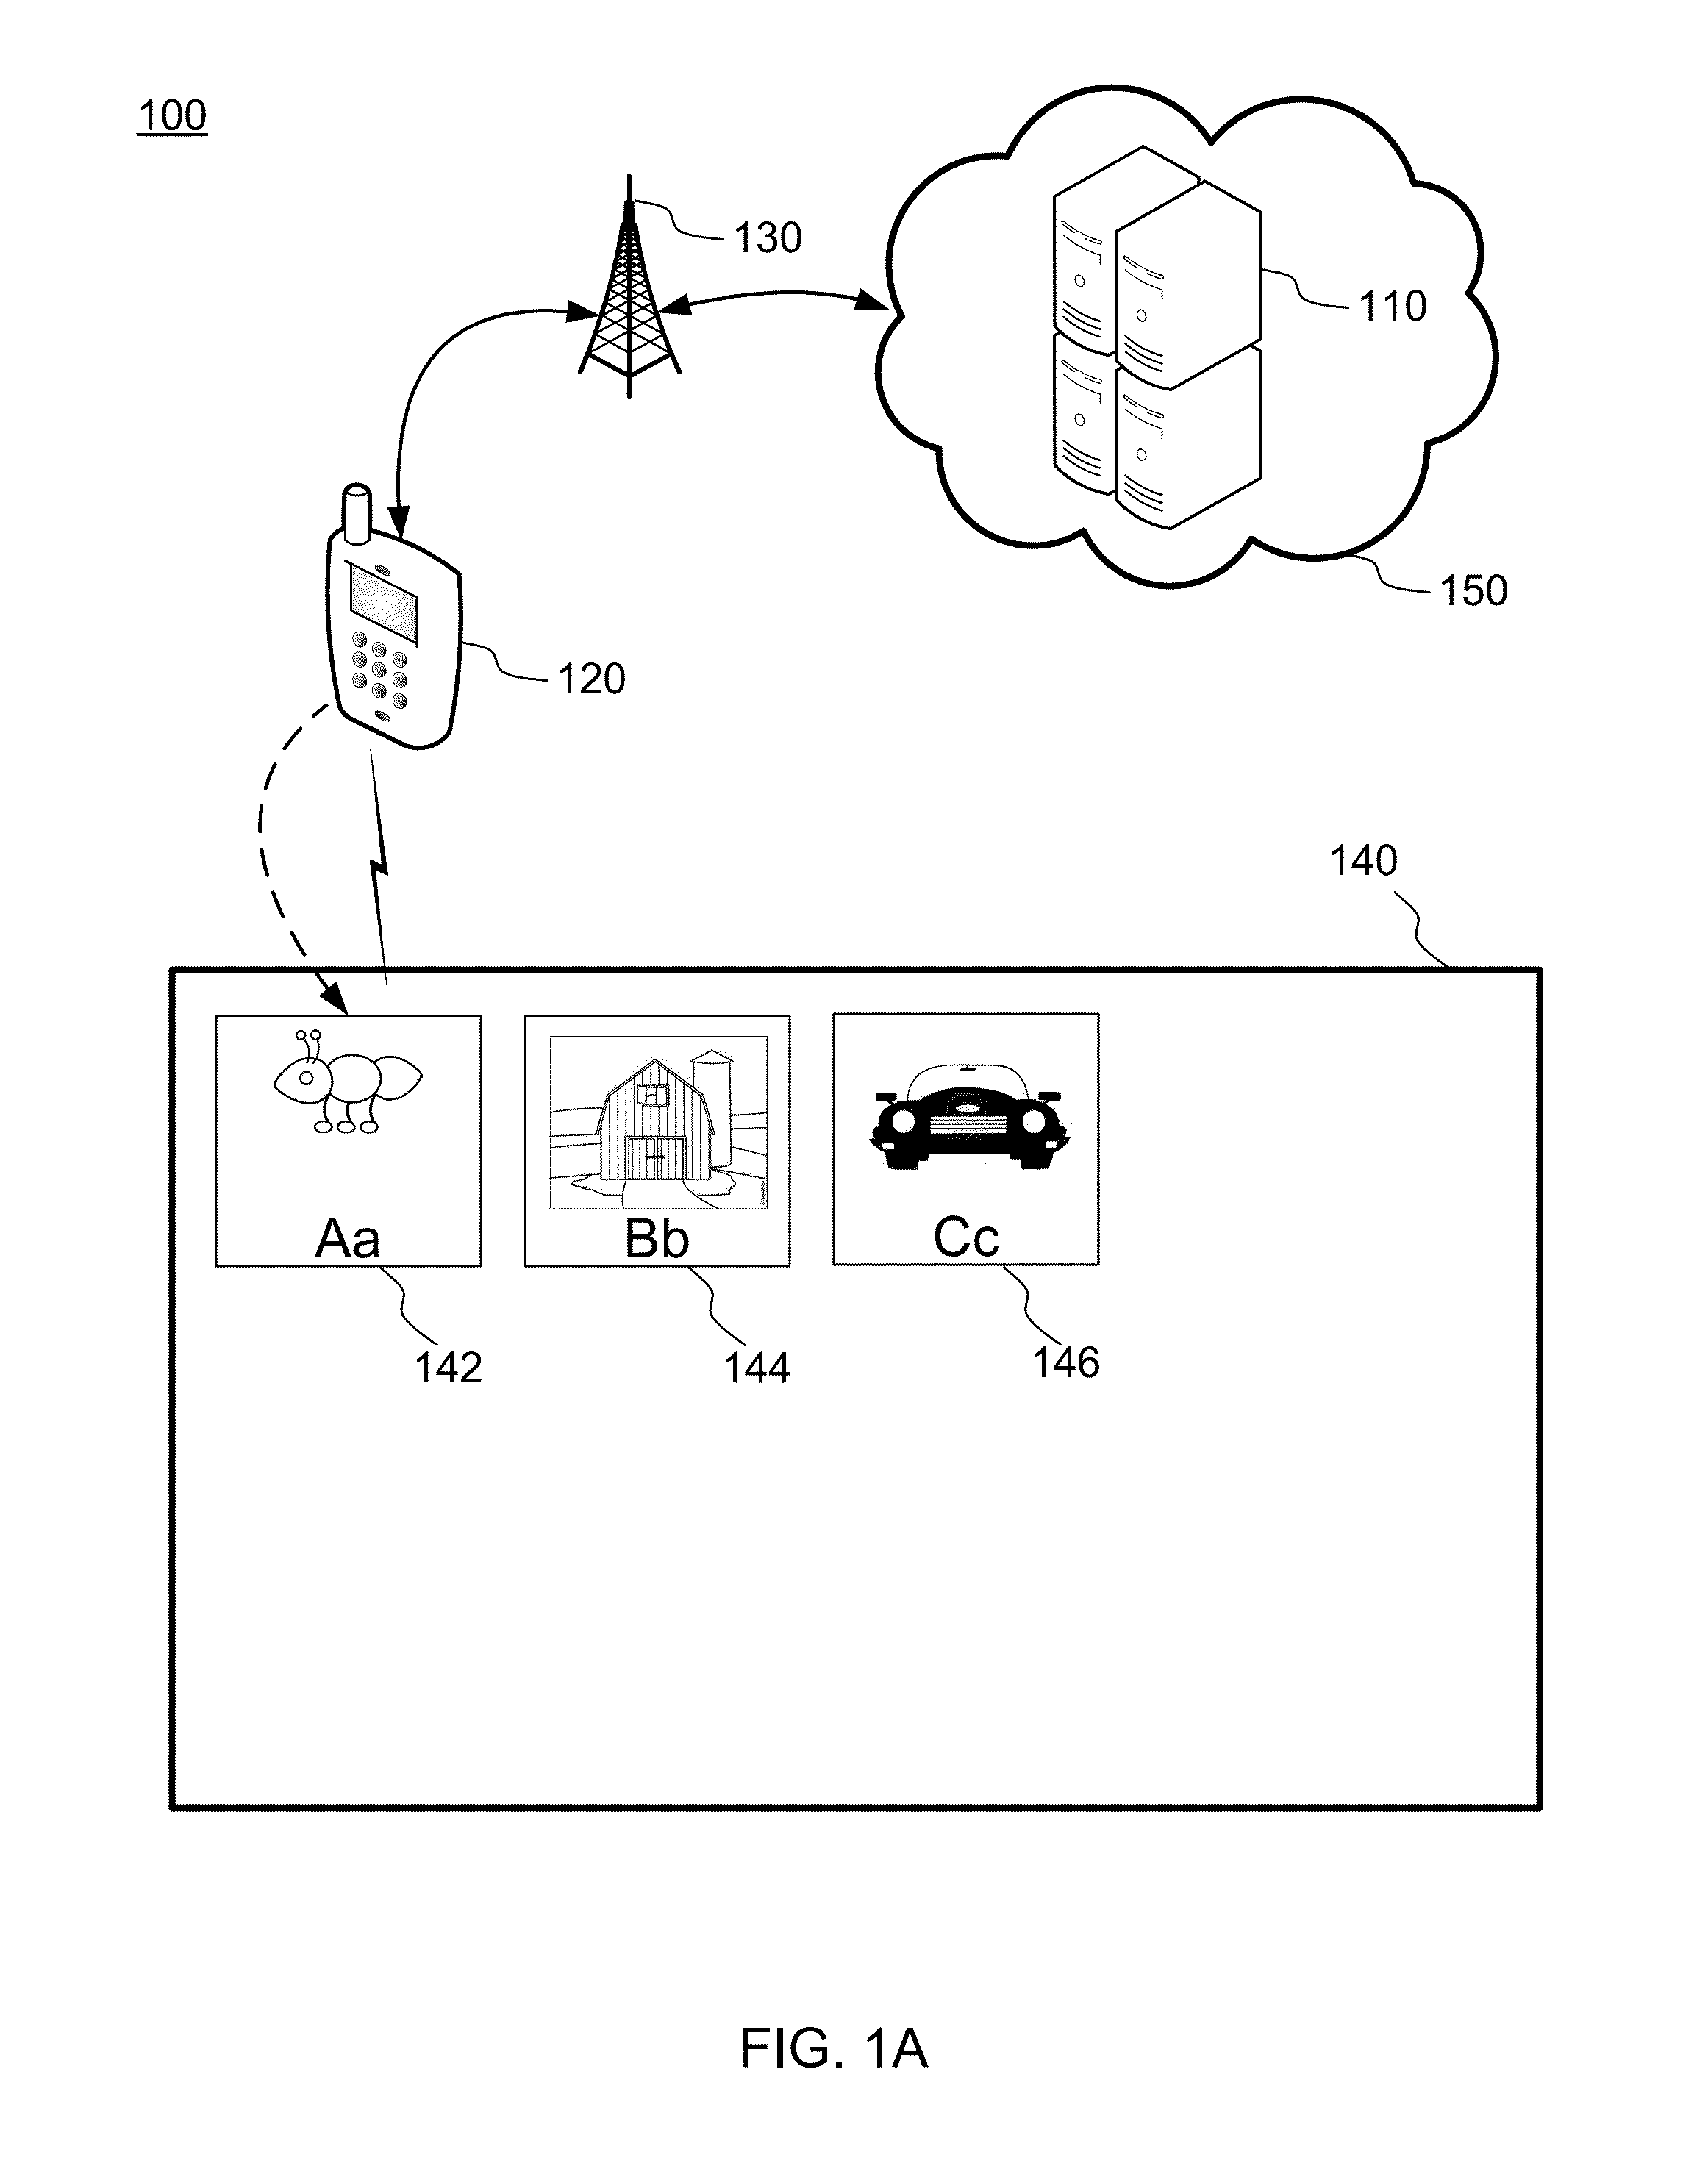 Near field communication (NFC) educational device and application